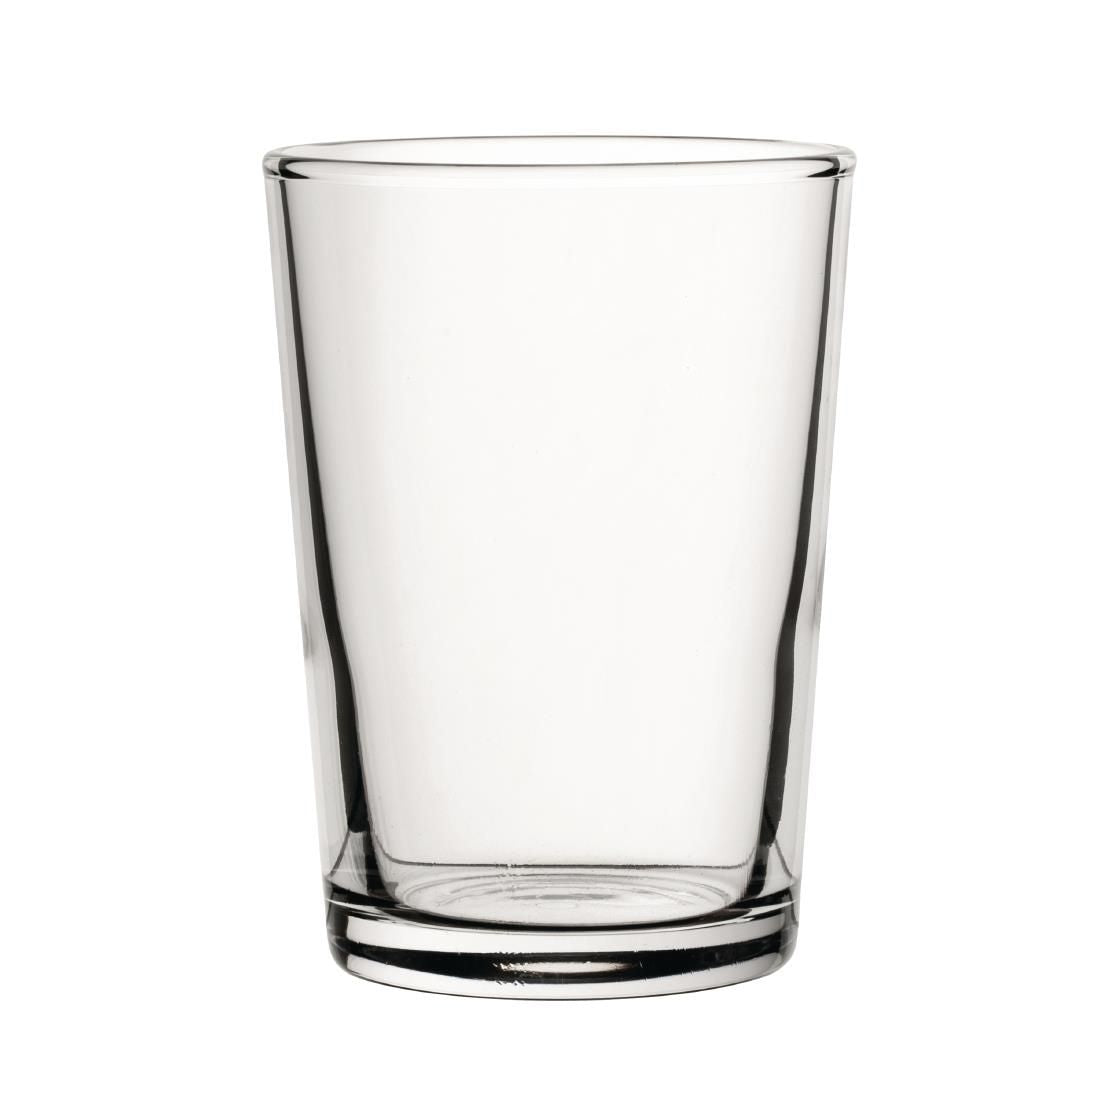 DM594 Utopia Toughened Conical Beer Glasses 200ml (Pack of 72) JD Catering Equipment Solutions Ltd